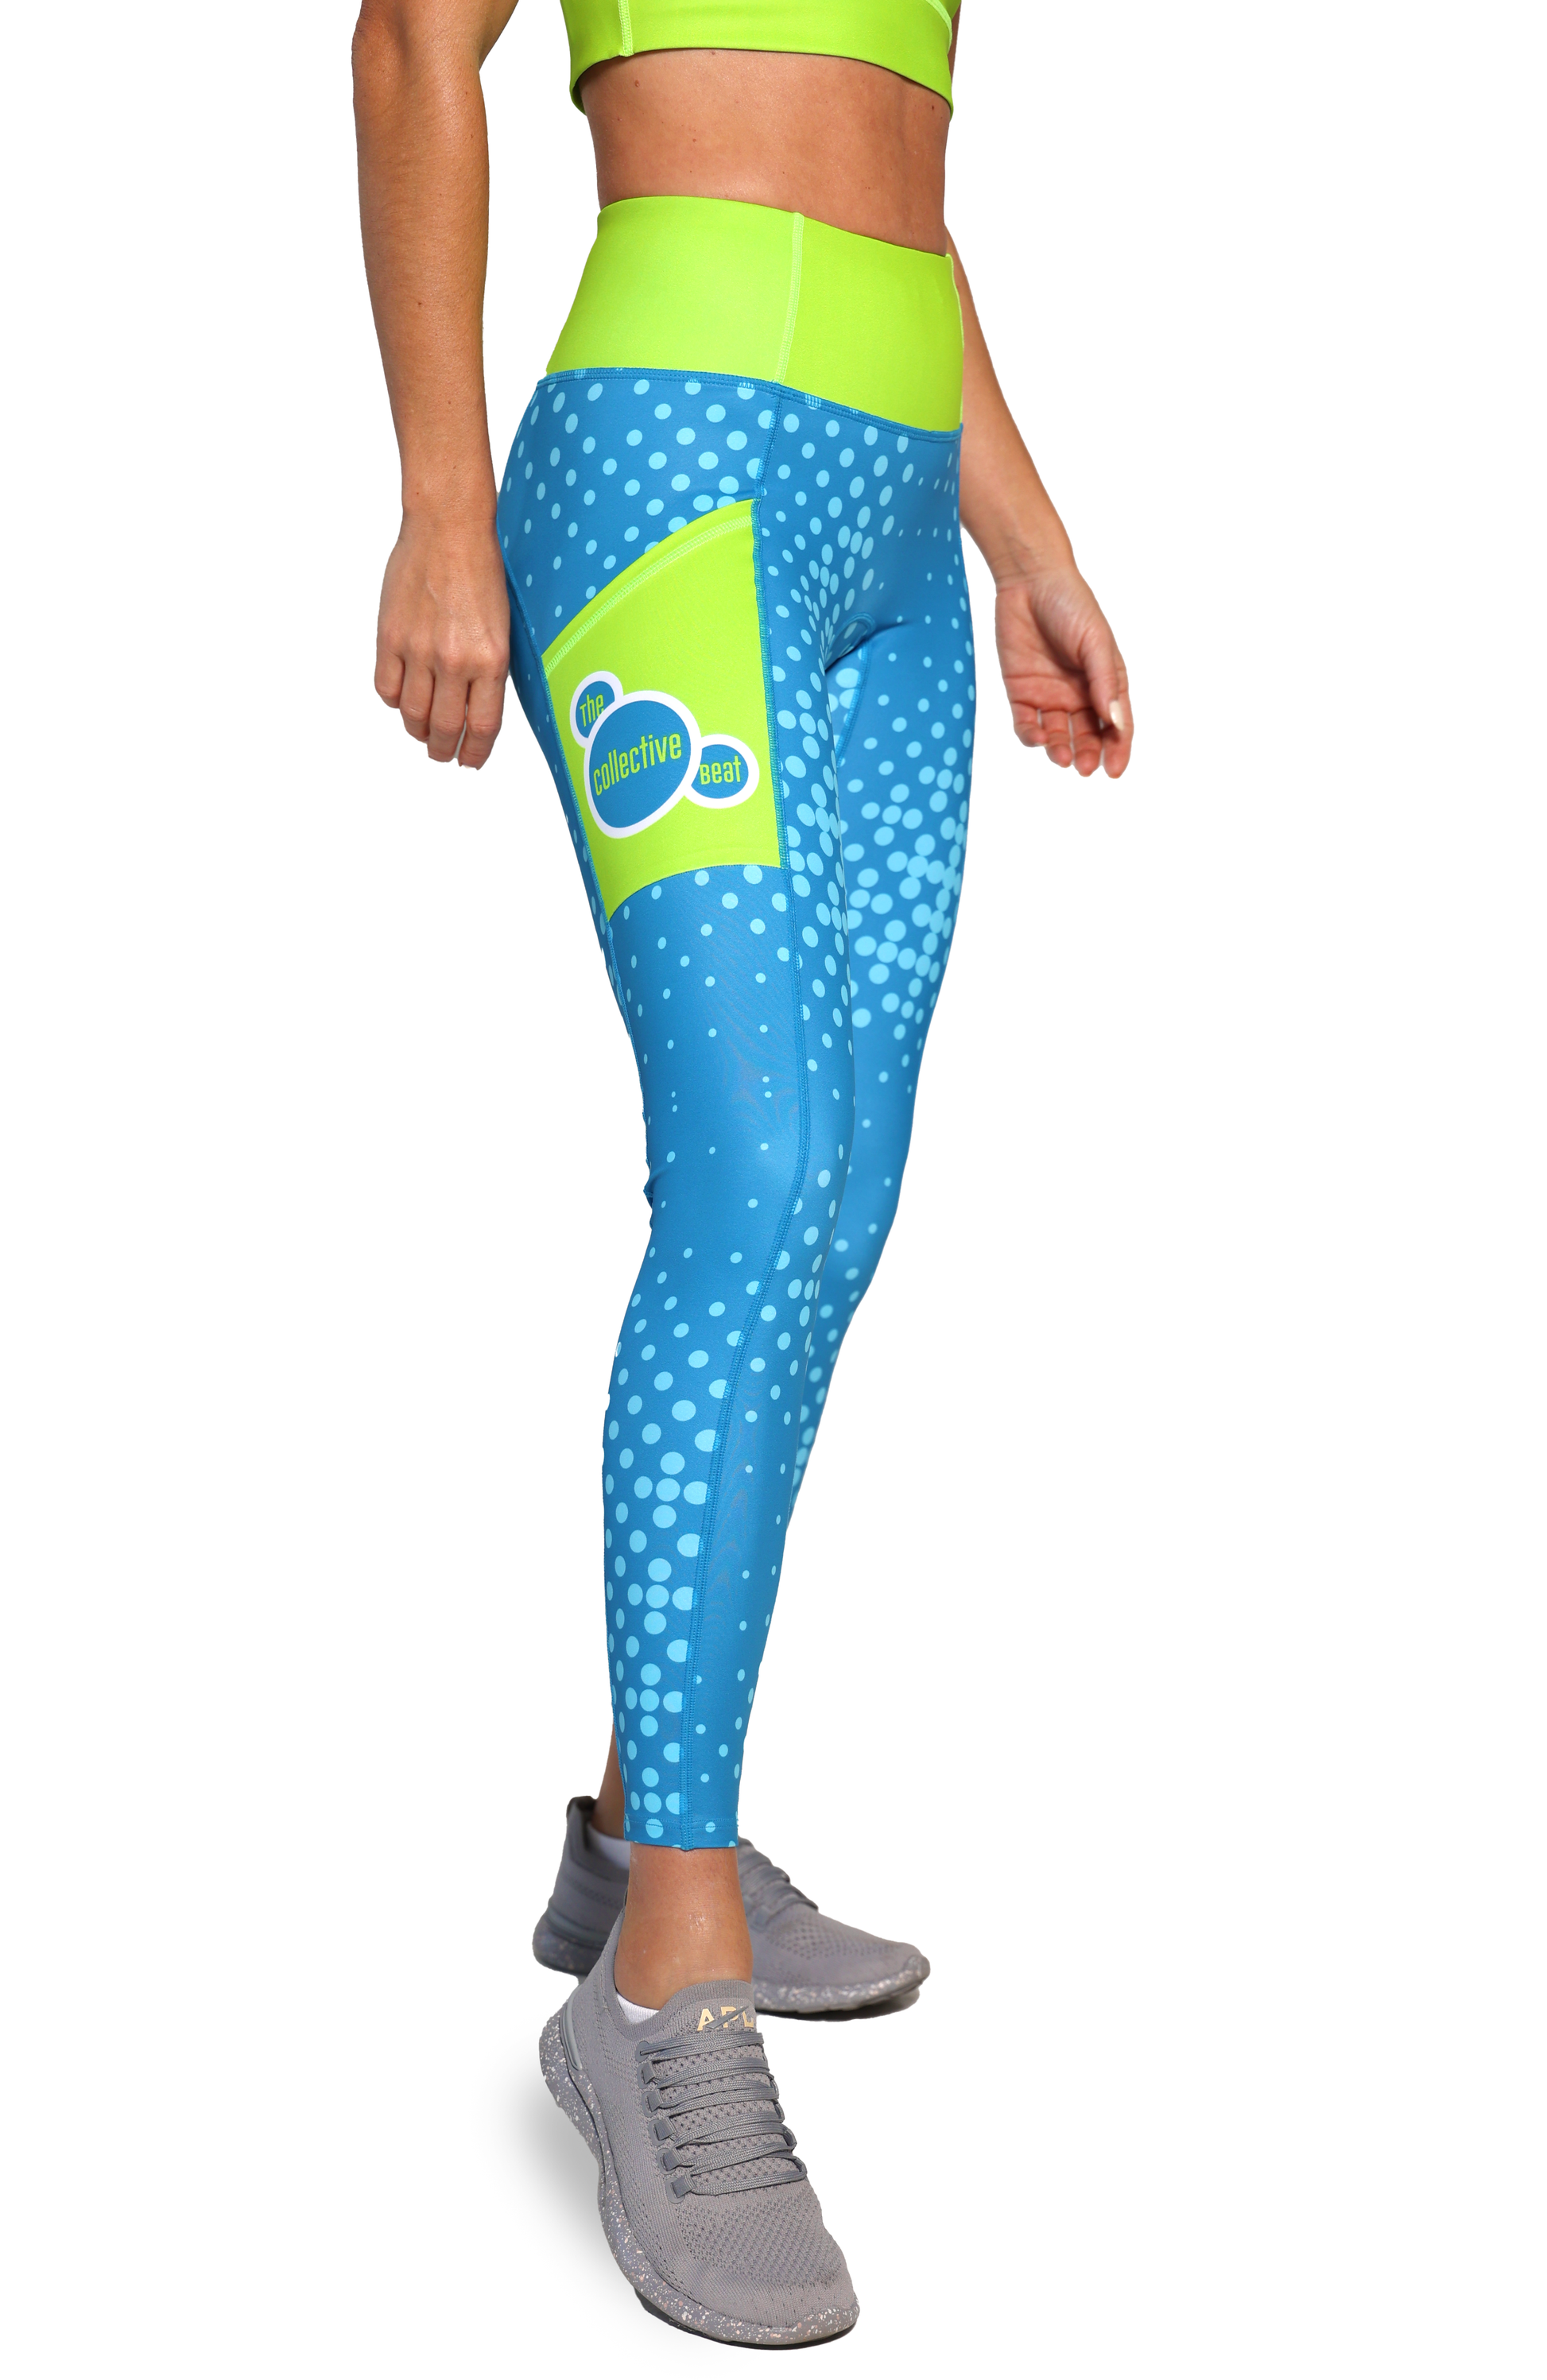 Coeur Sports Run Tights PRESALE! Collective Beat 23 Performance Tights